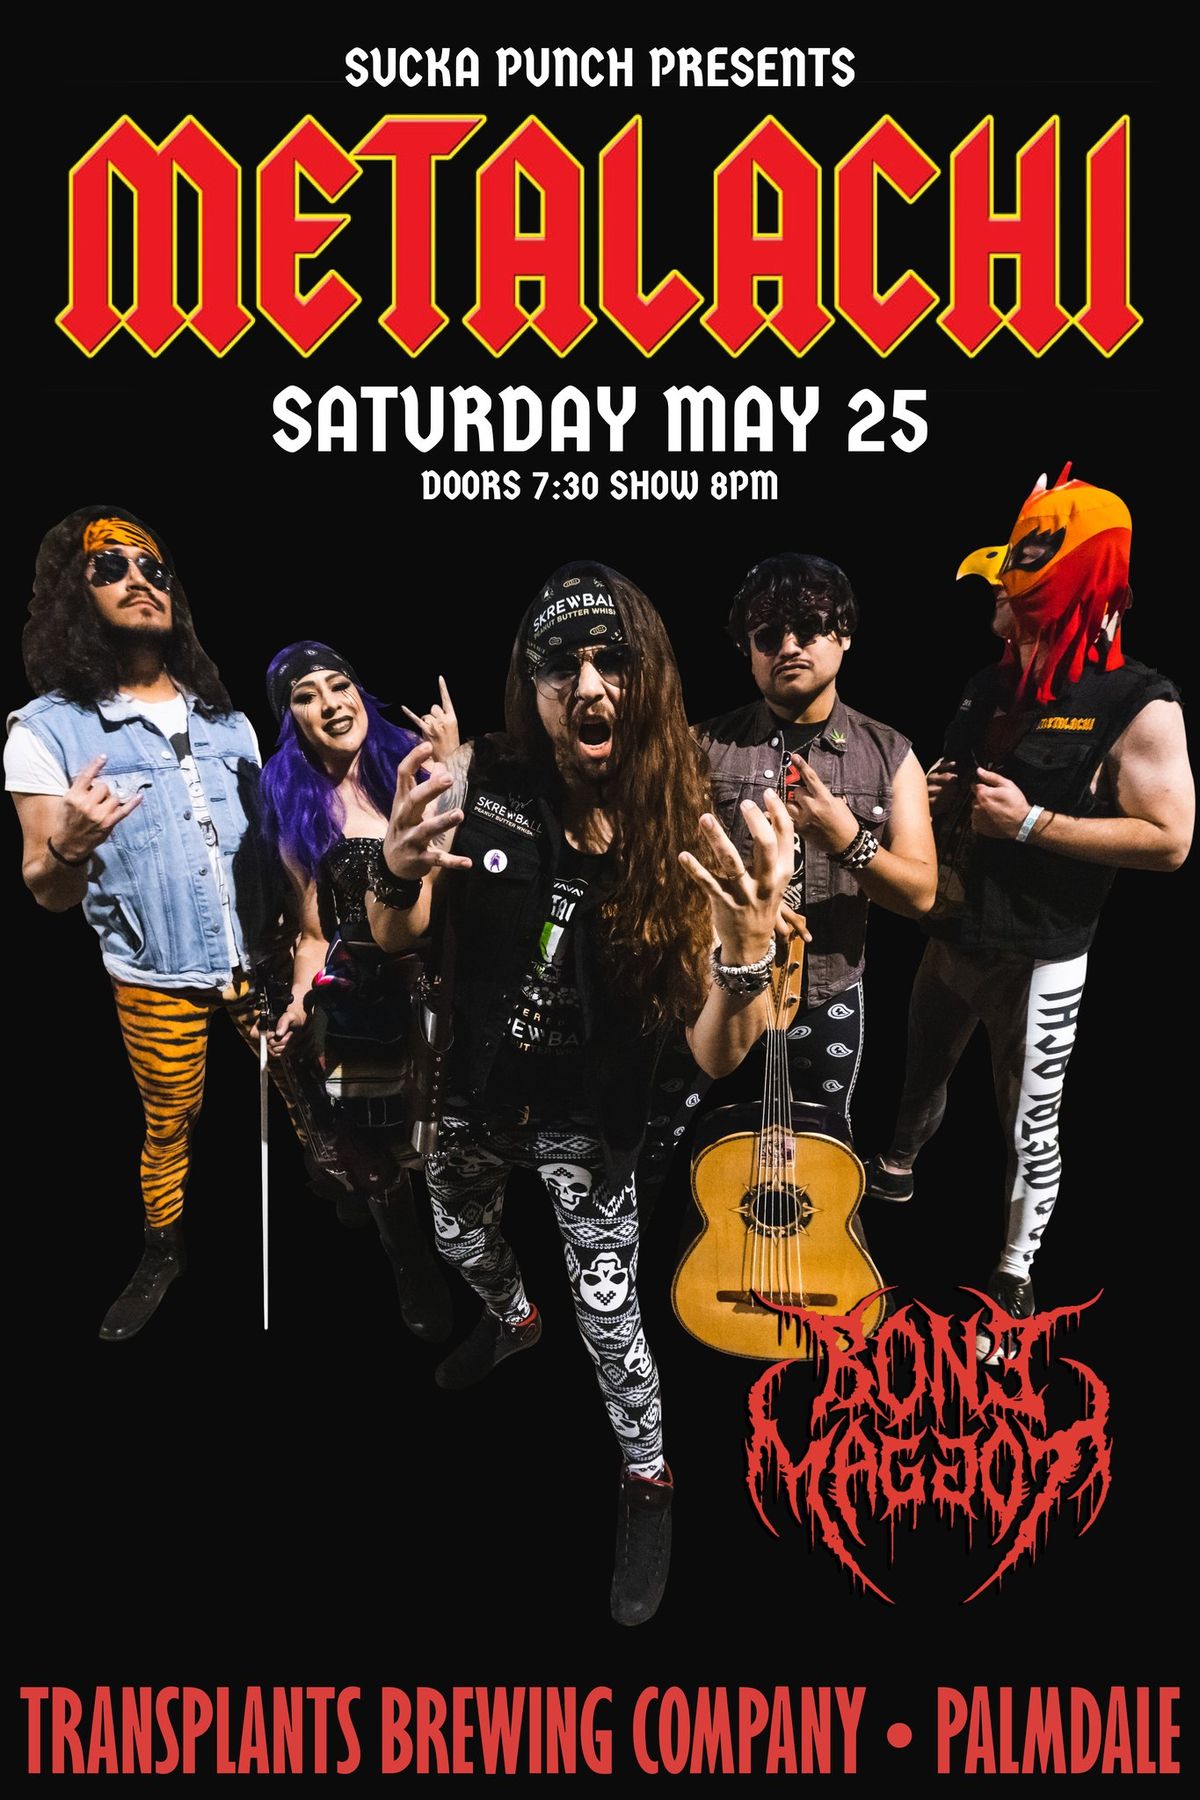 Sucka Punch Productions METALACHI LIVE IN CONCERT MAY 25TH AT TRANSPLANTS IN PALMDALE